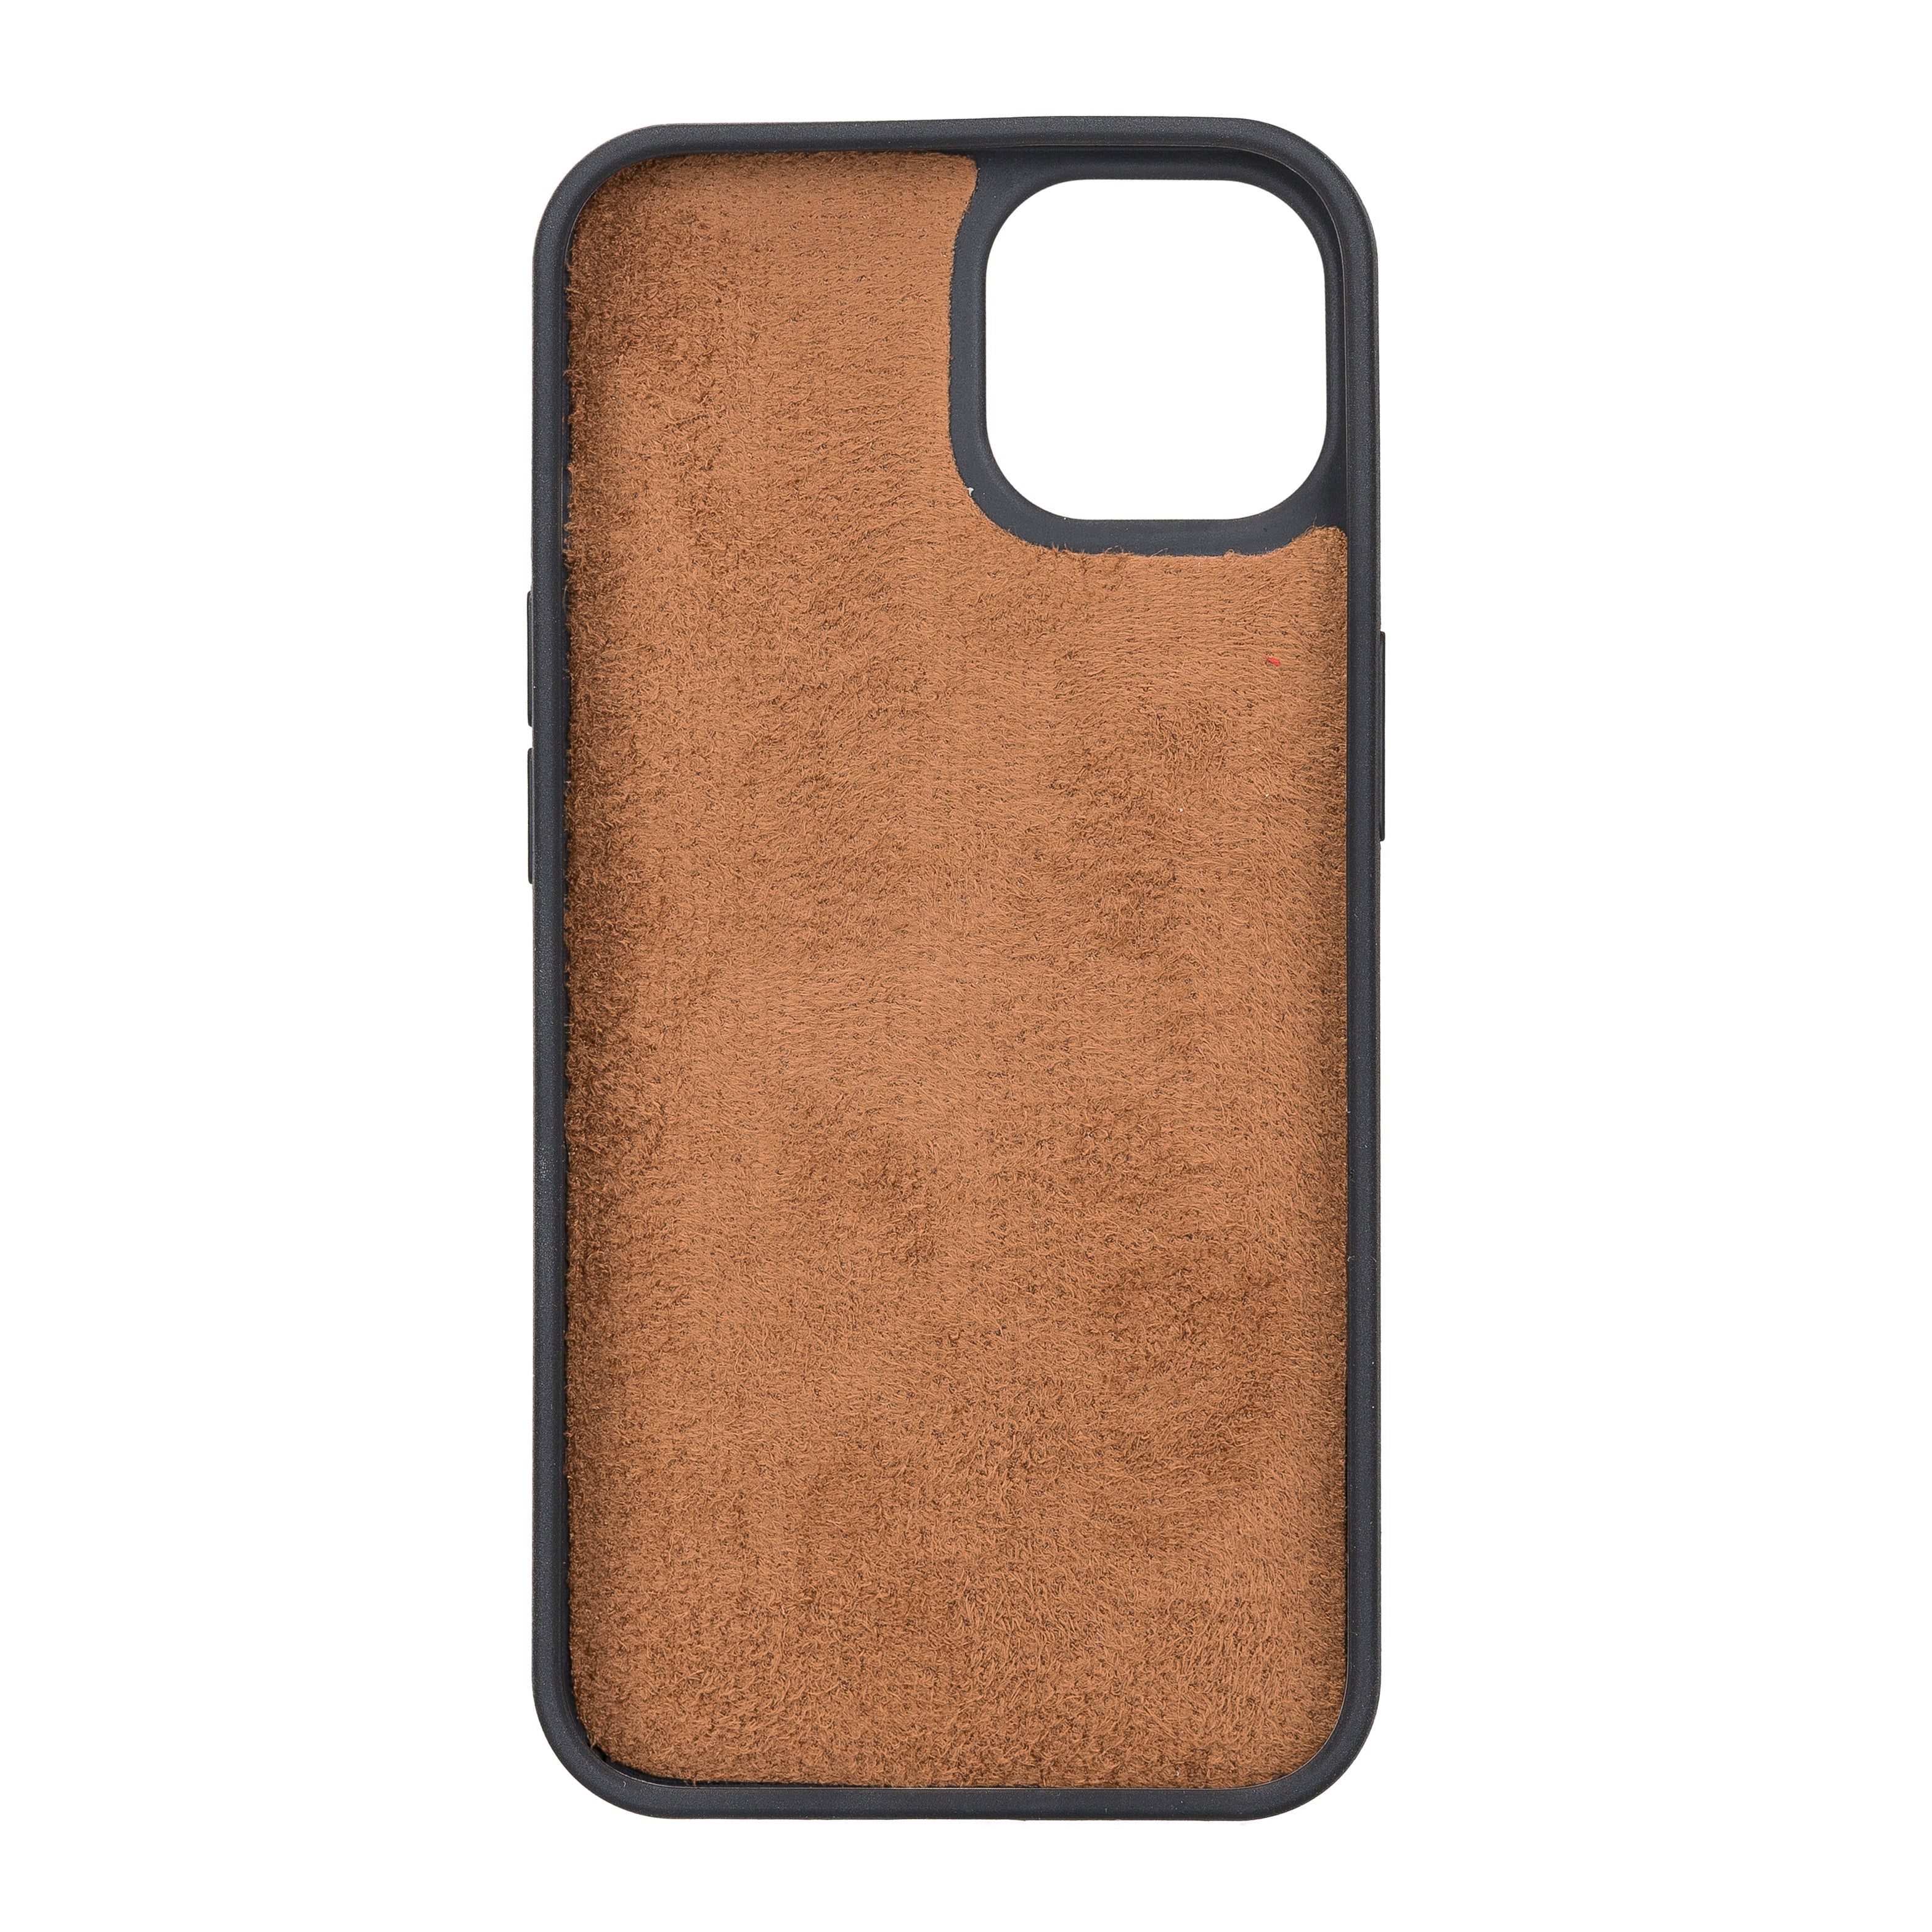 Burnished Tan Leather Snap On Cover Case for iPhone 13 Pro (6.1")